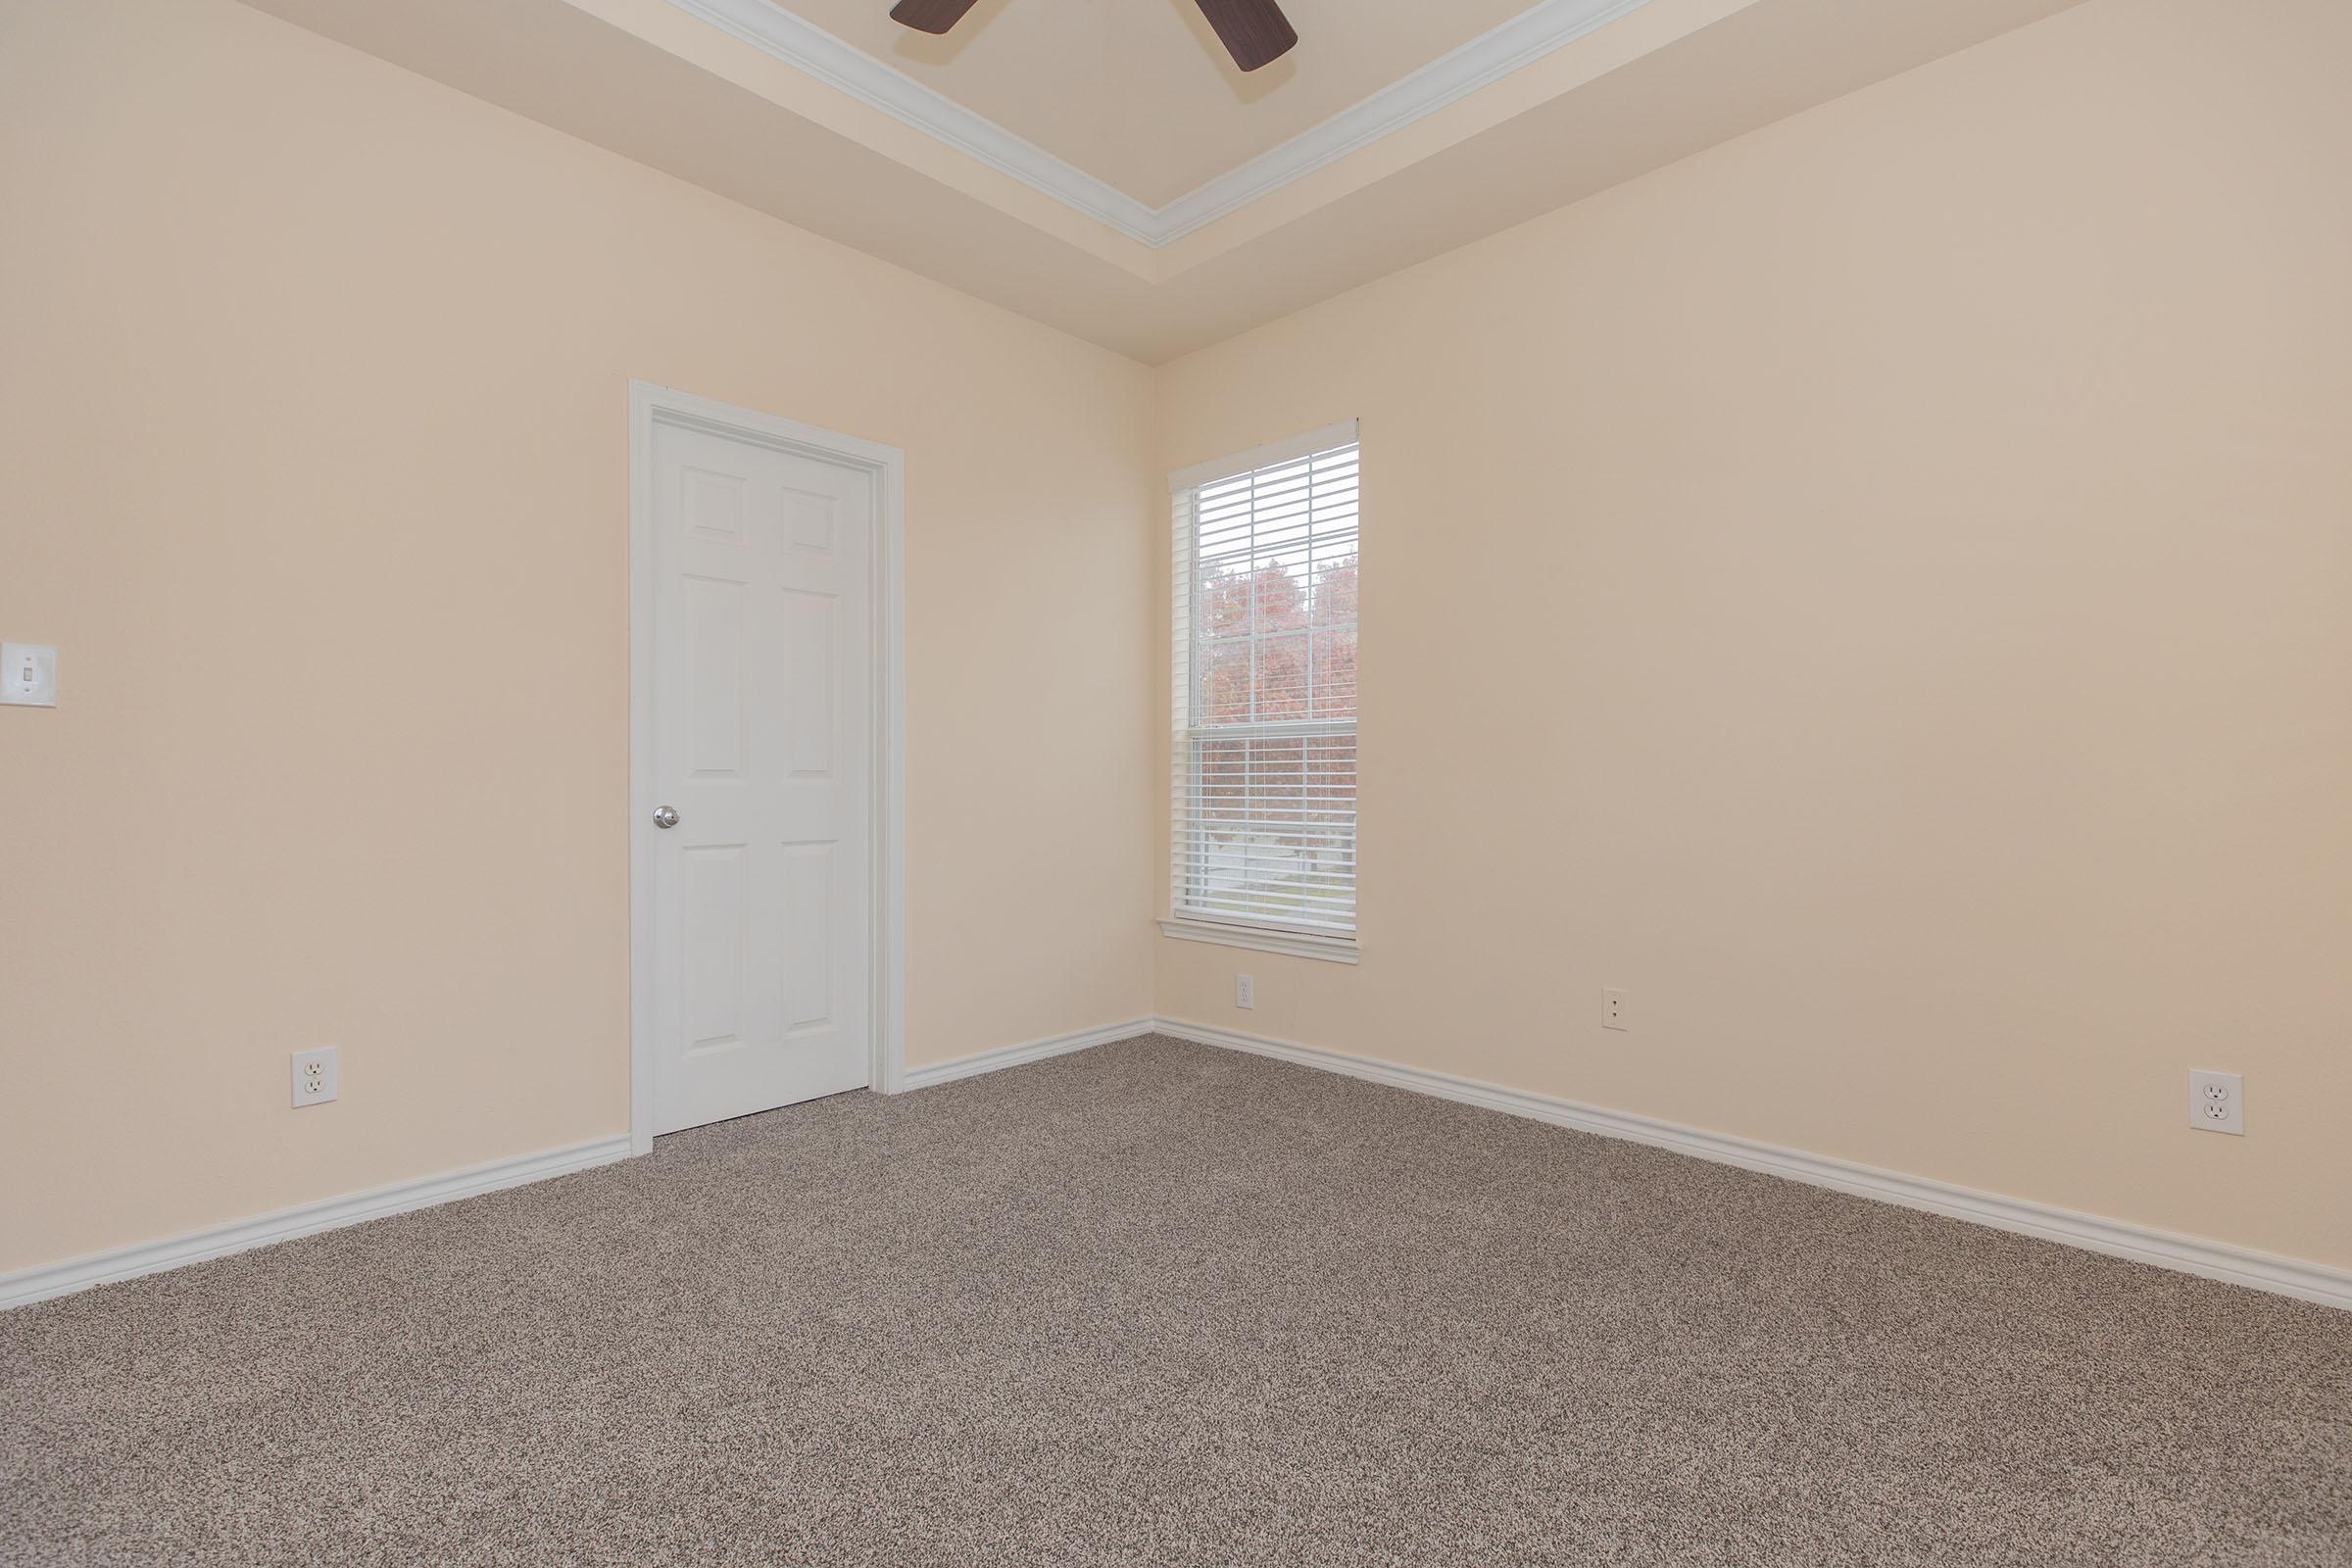 carpeted vacant bedroom with a closed bathroom door